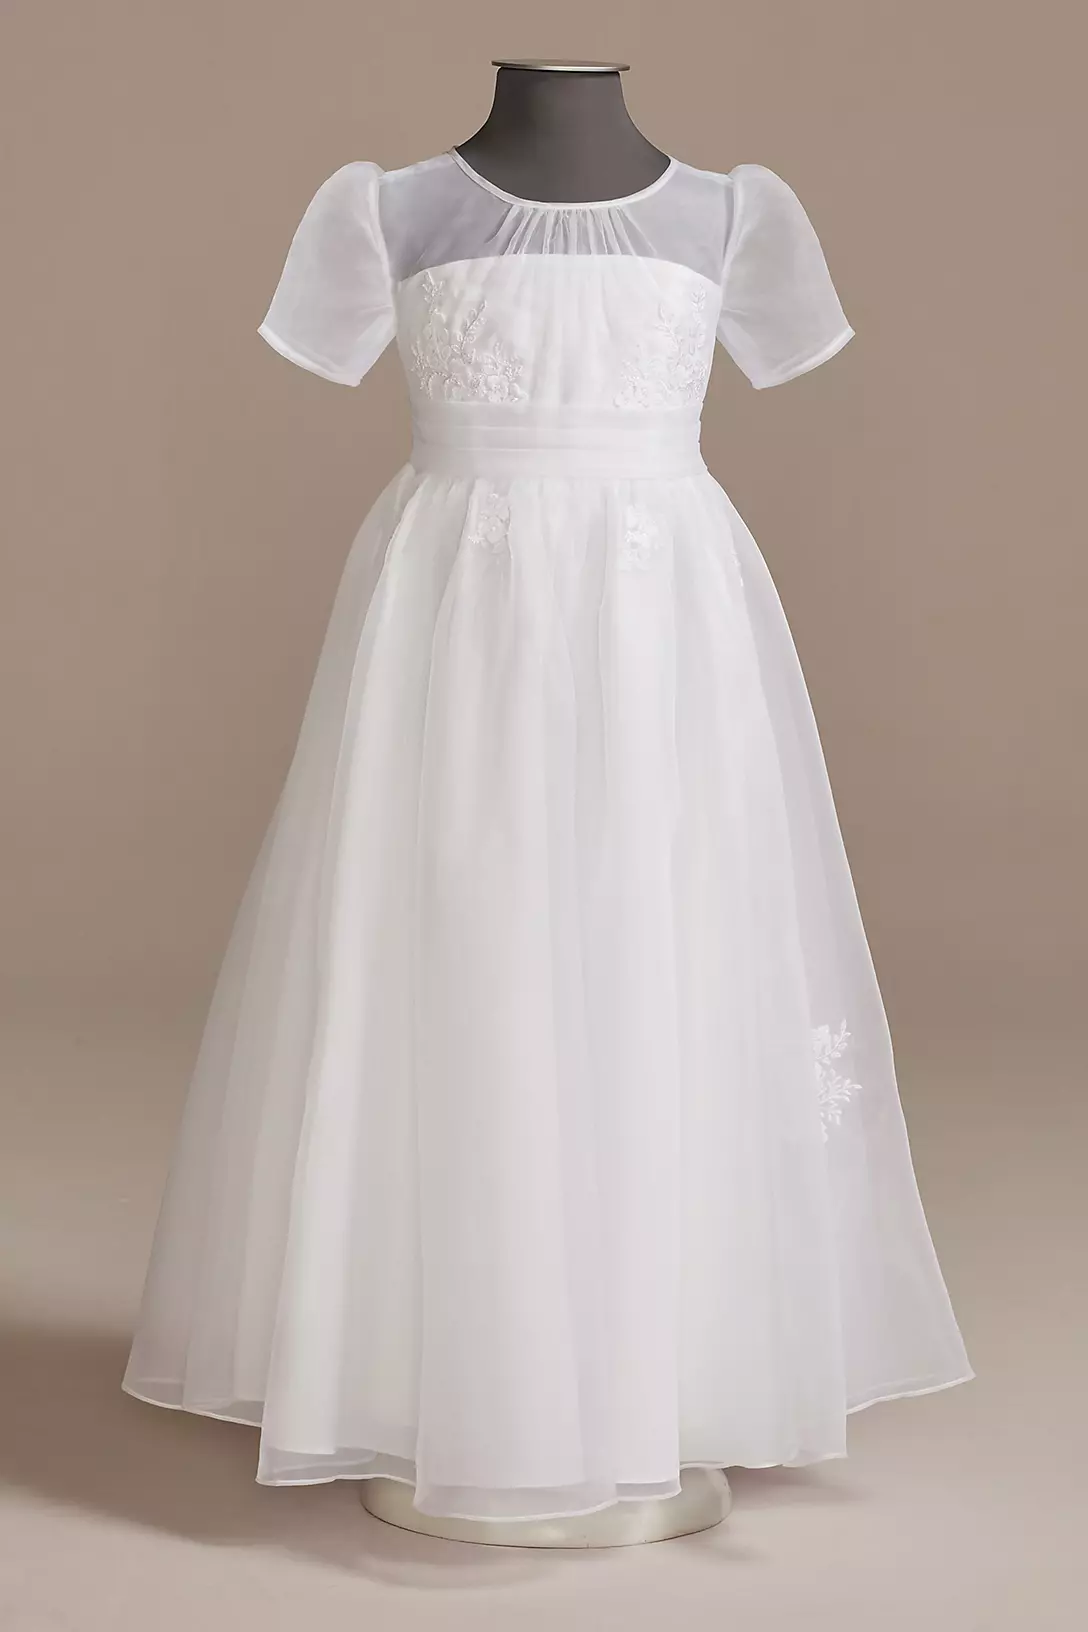 Short Sleeve Flower Girl Dress with Appliques Image